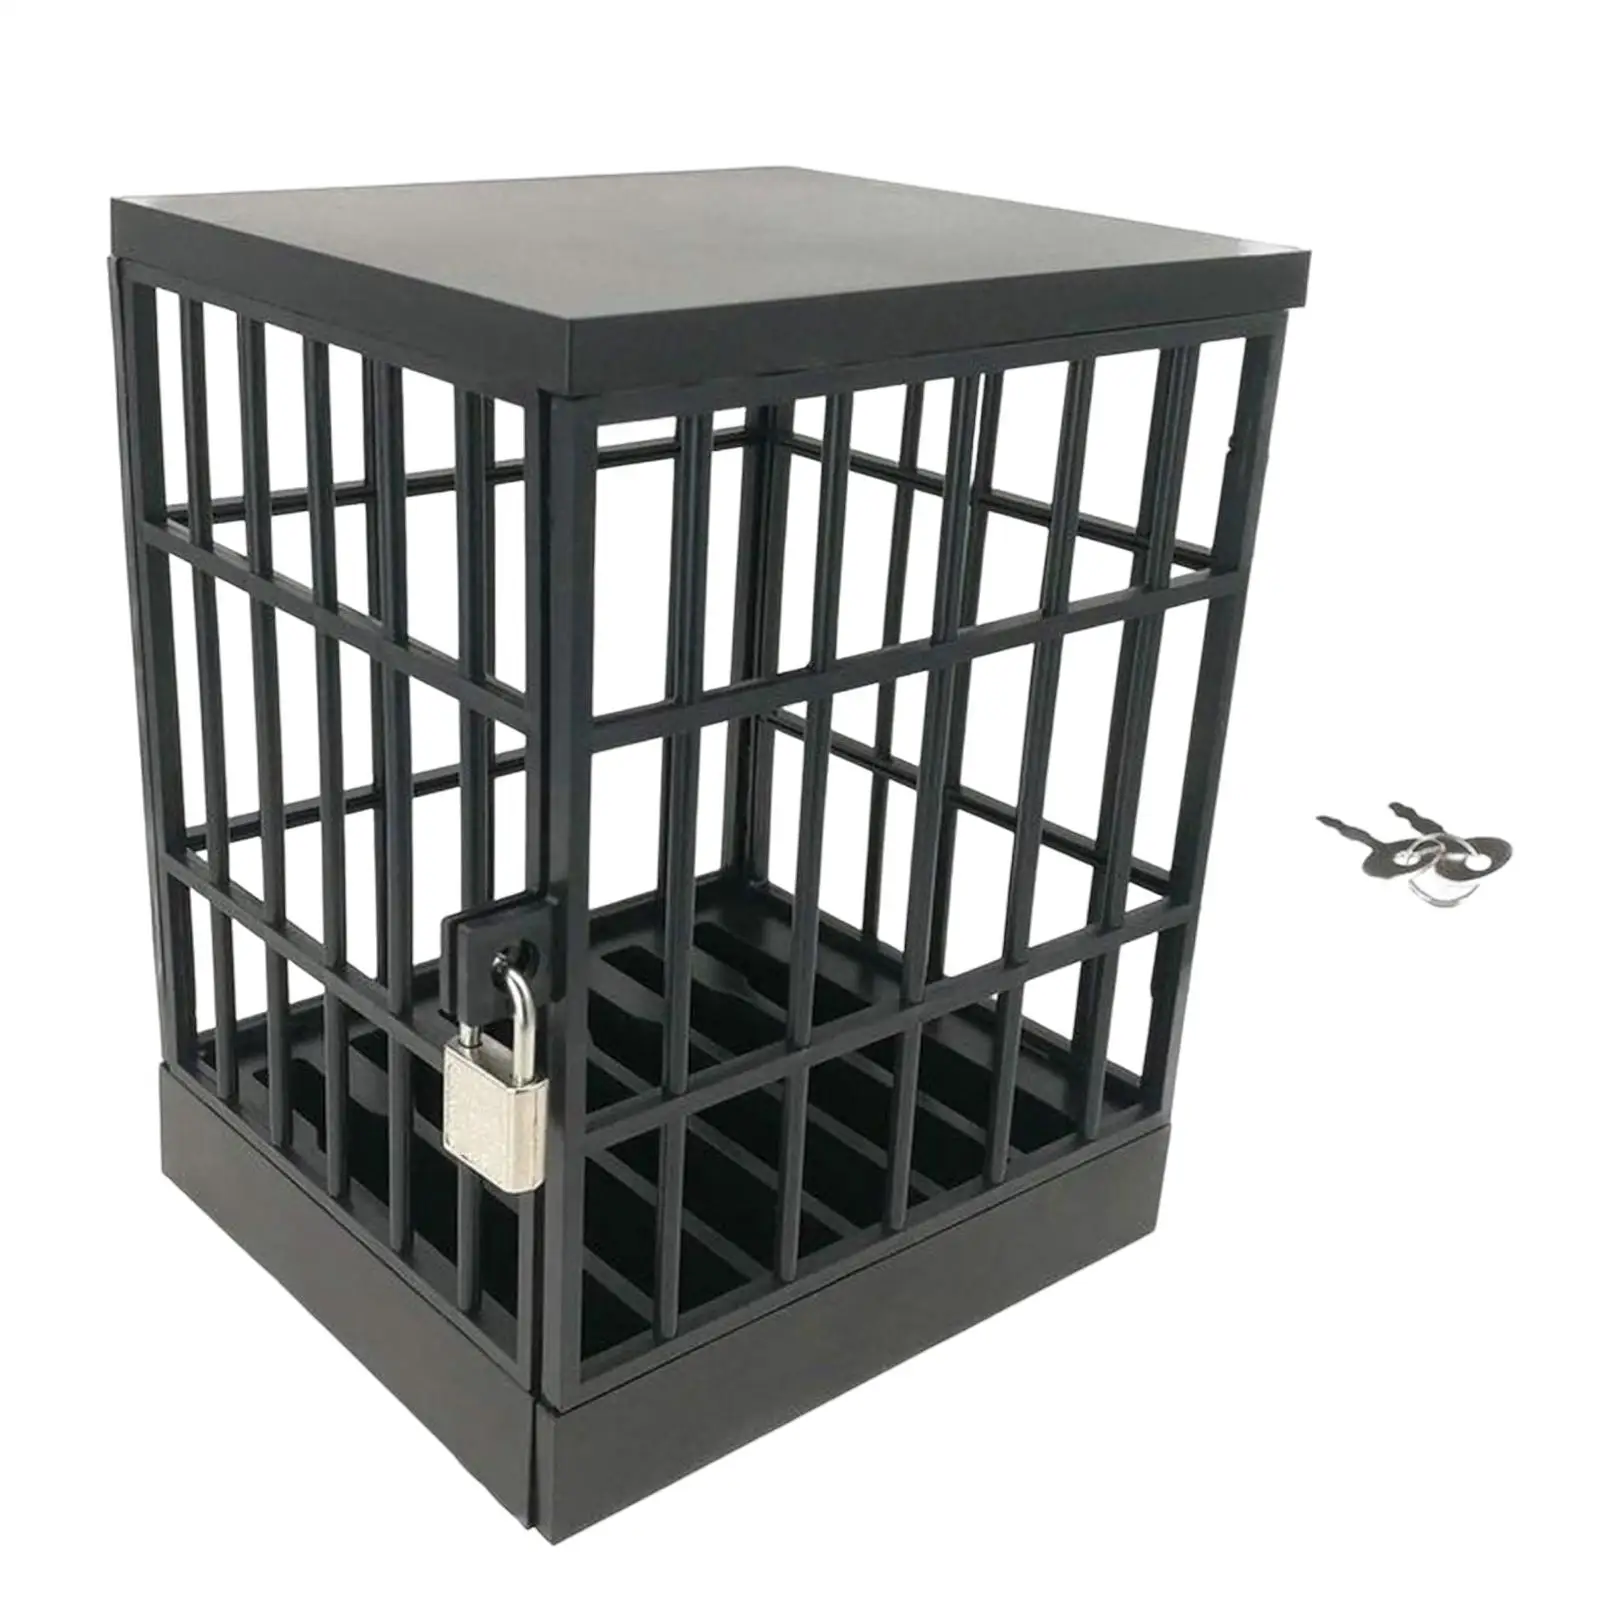 Mobile Phone Lock Box Jail Prison Novelty Gift for Kids Adults Cell Phones